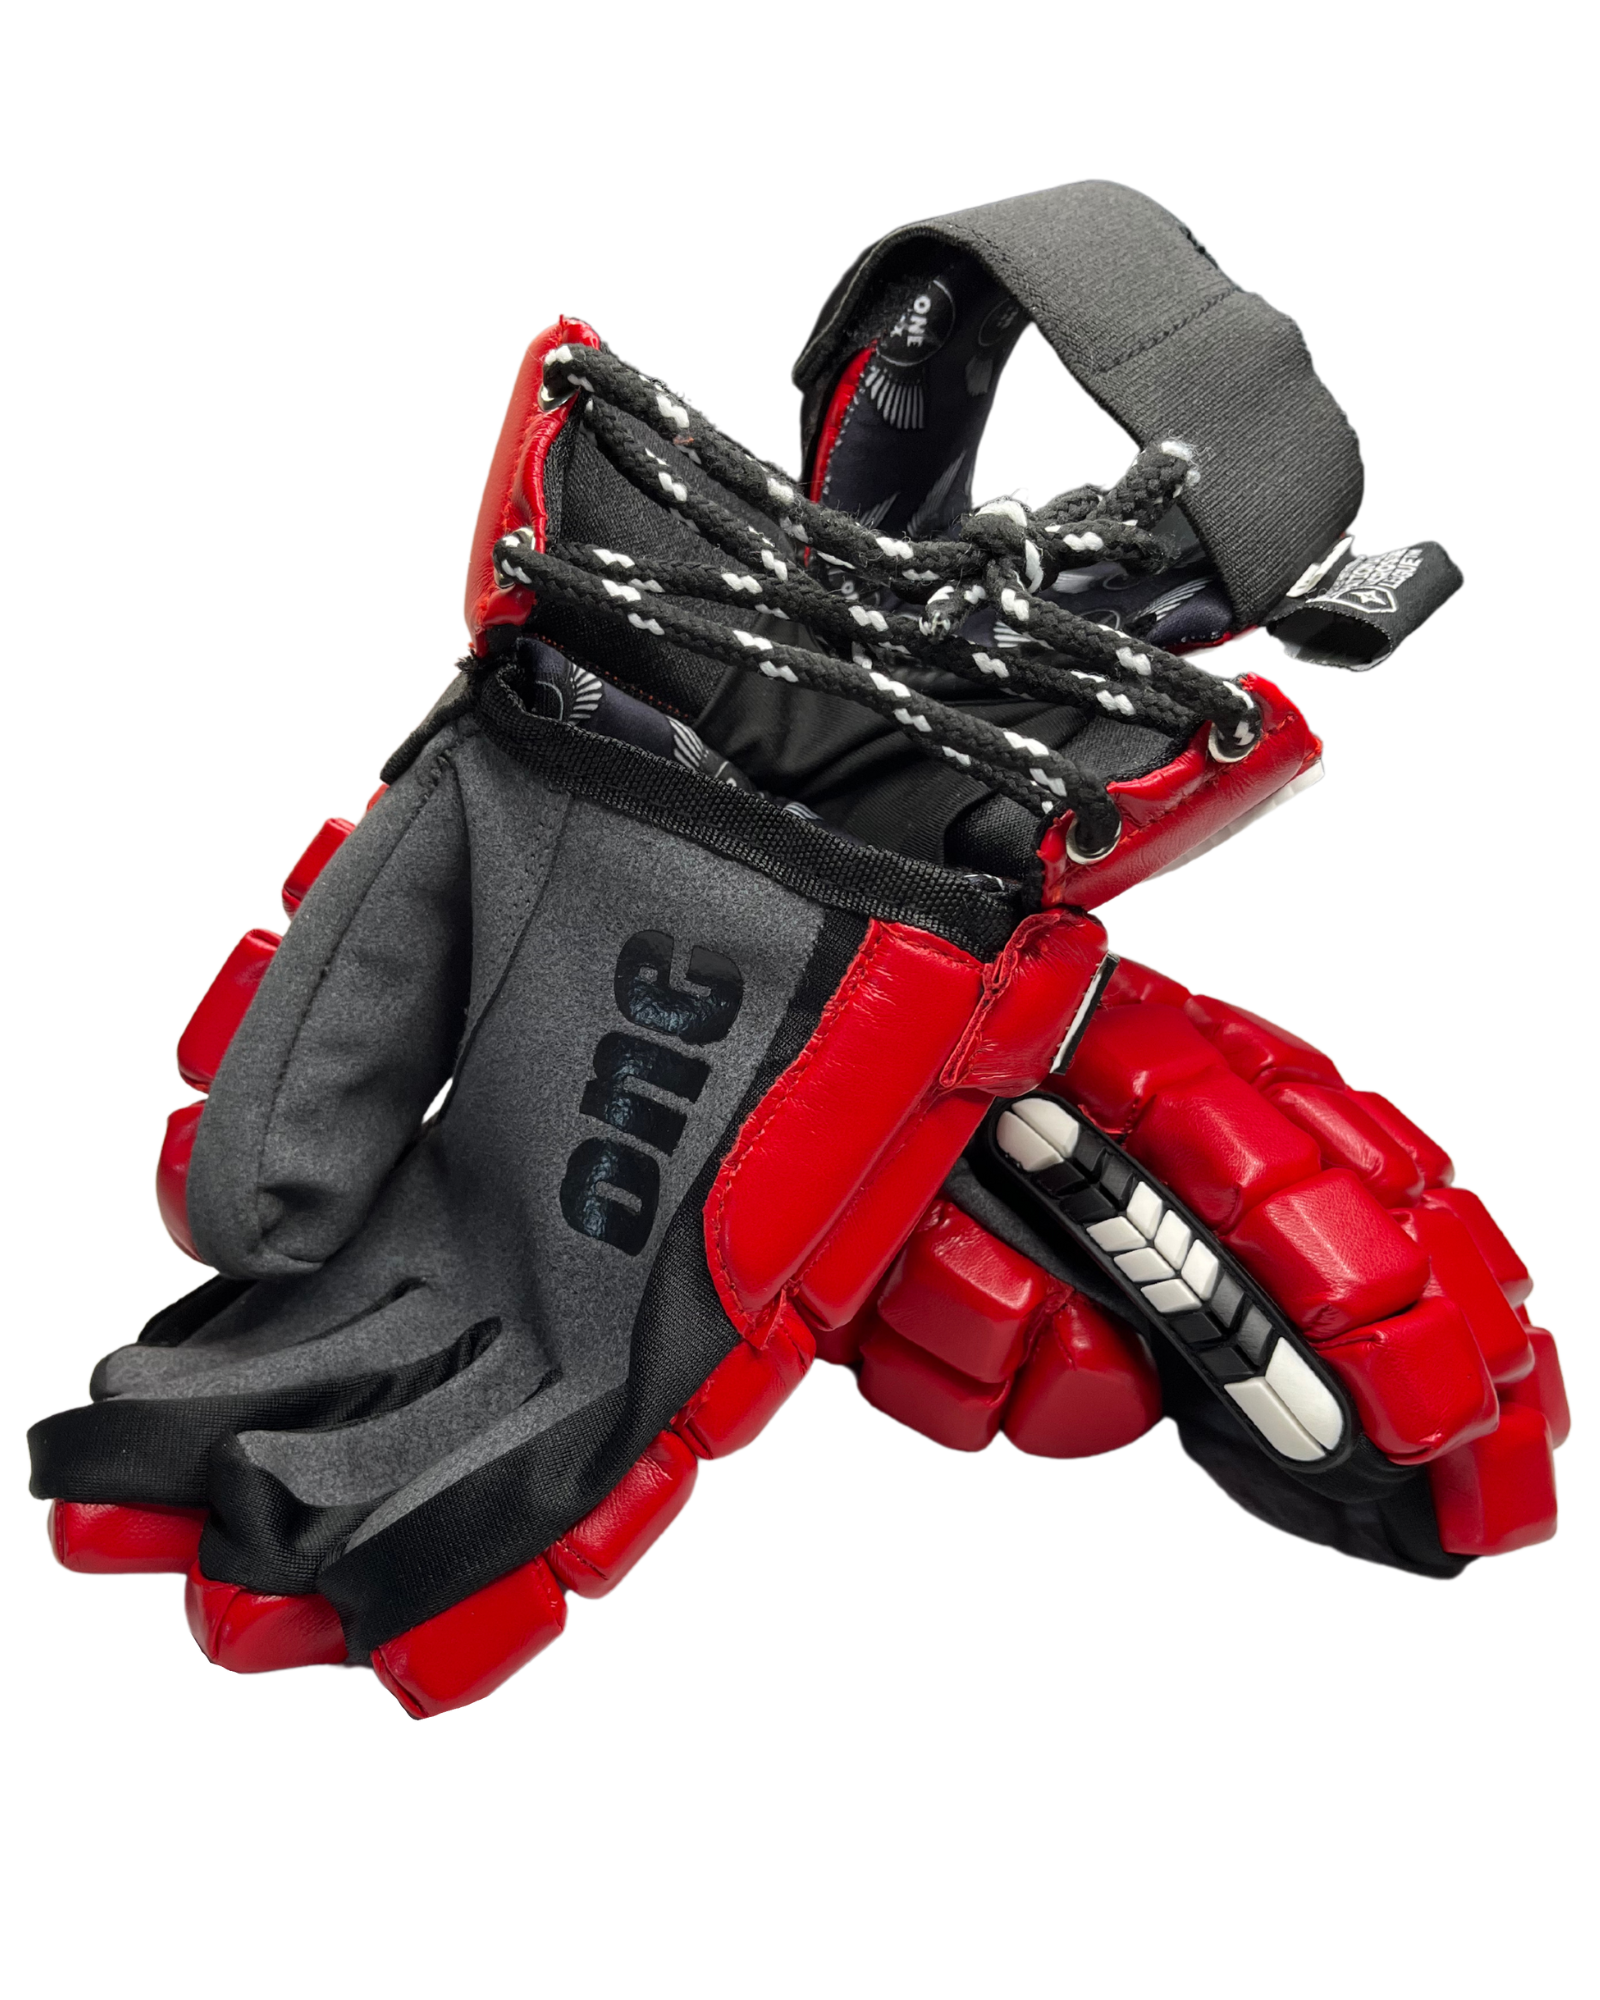 JR. 1 Gloves in Red | 2 Kids Sizes Available | HYBRID Box & Field Lacrosse Gloves - One Lax